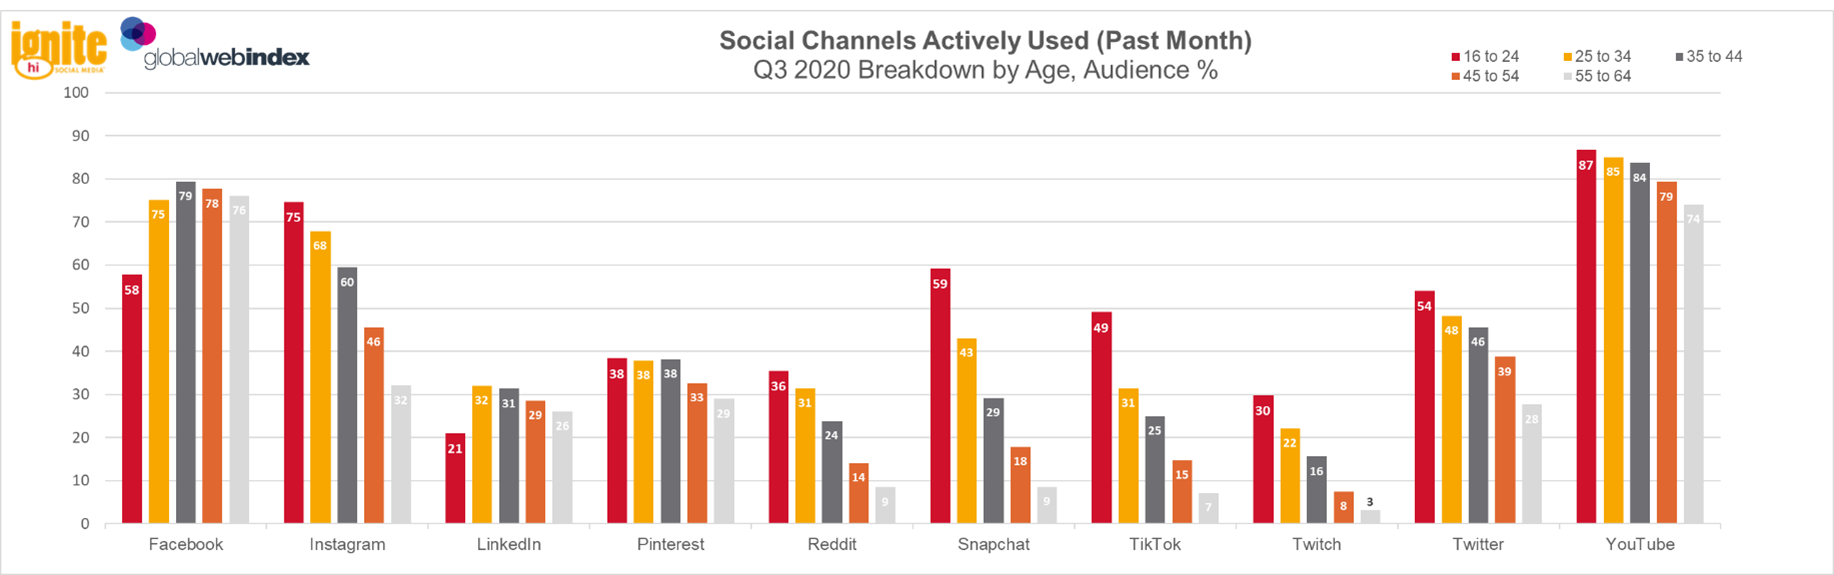 GWI Chart: Social Channels Actively Used (Past Month)